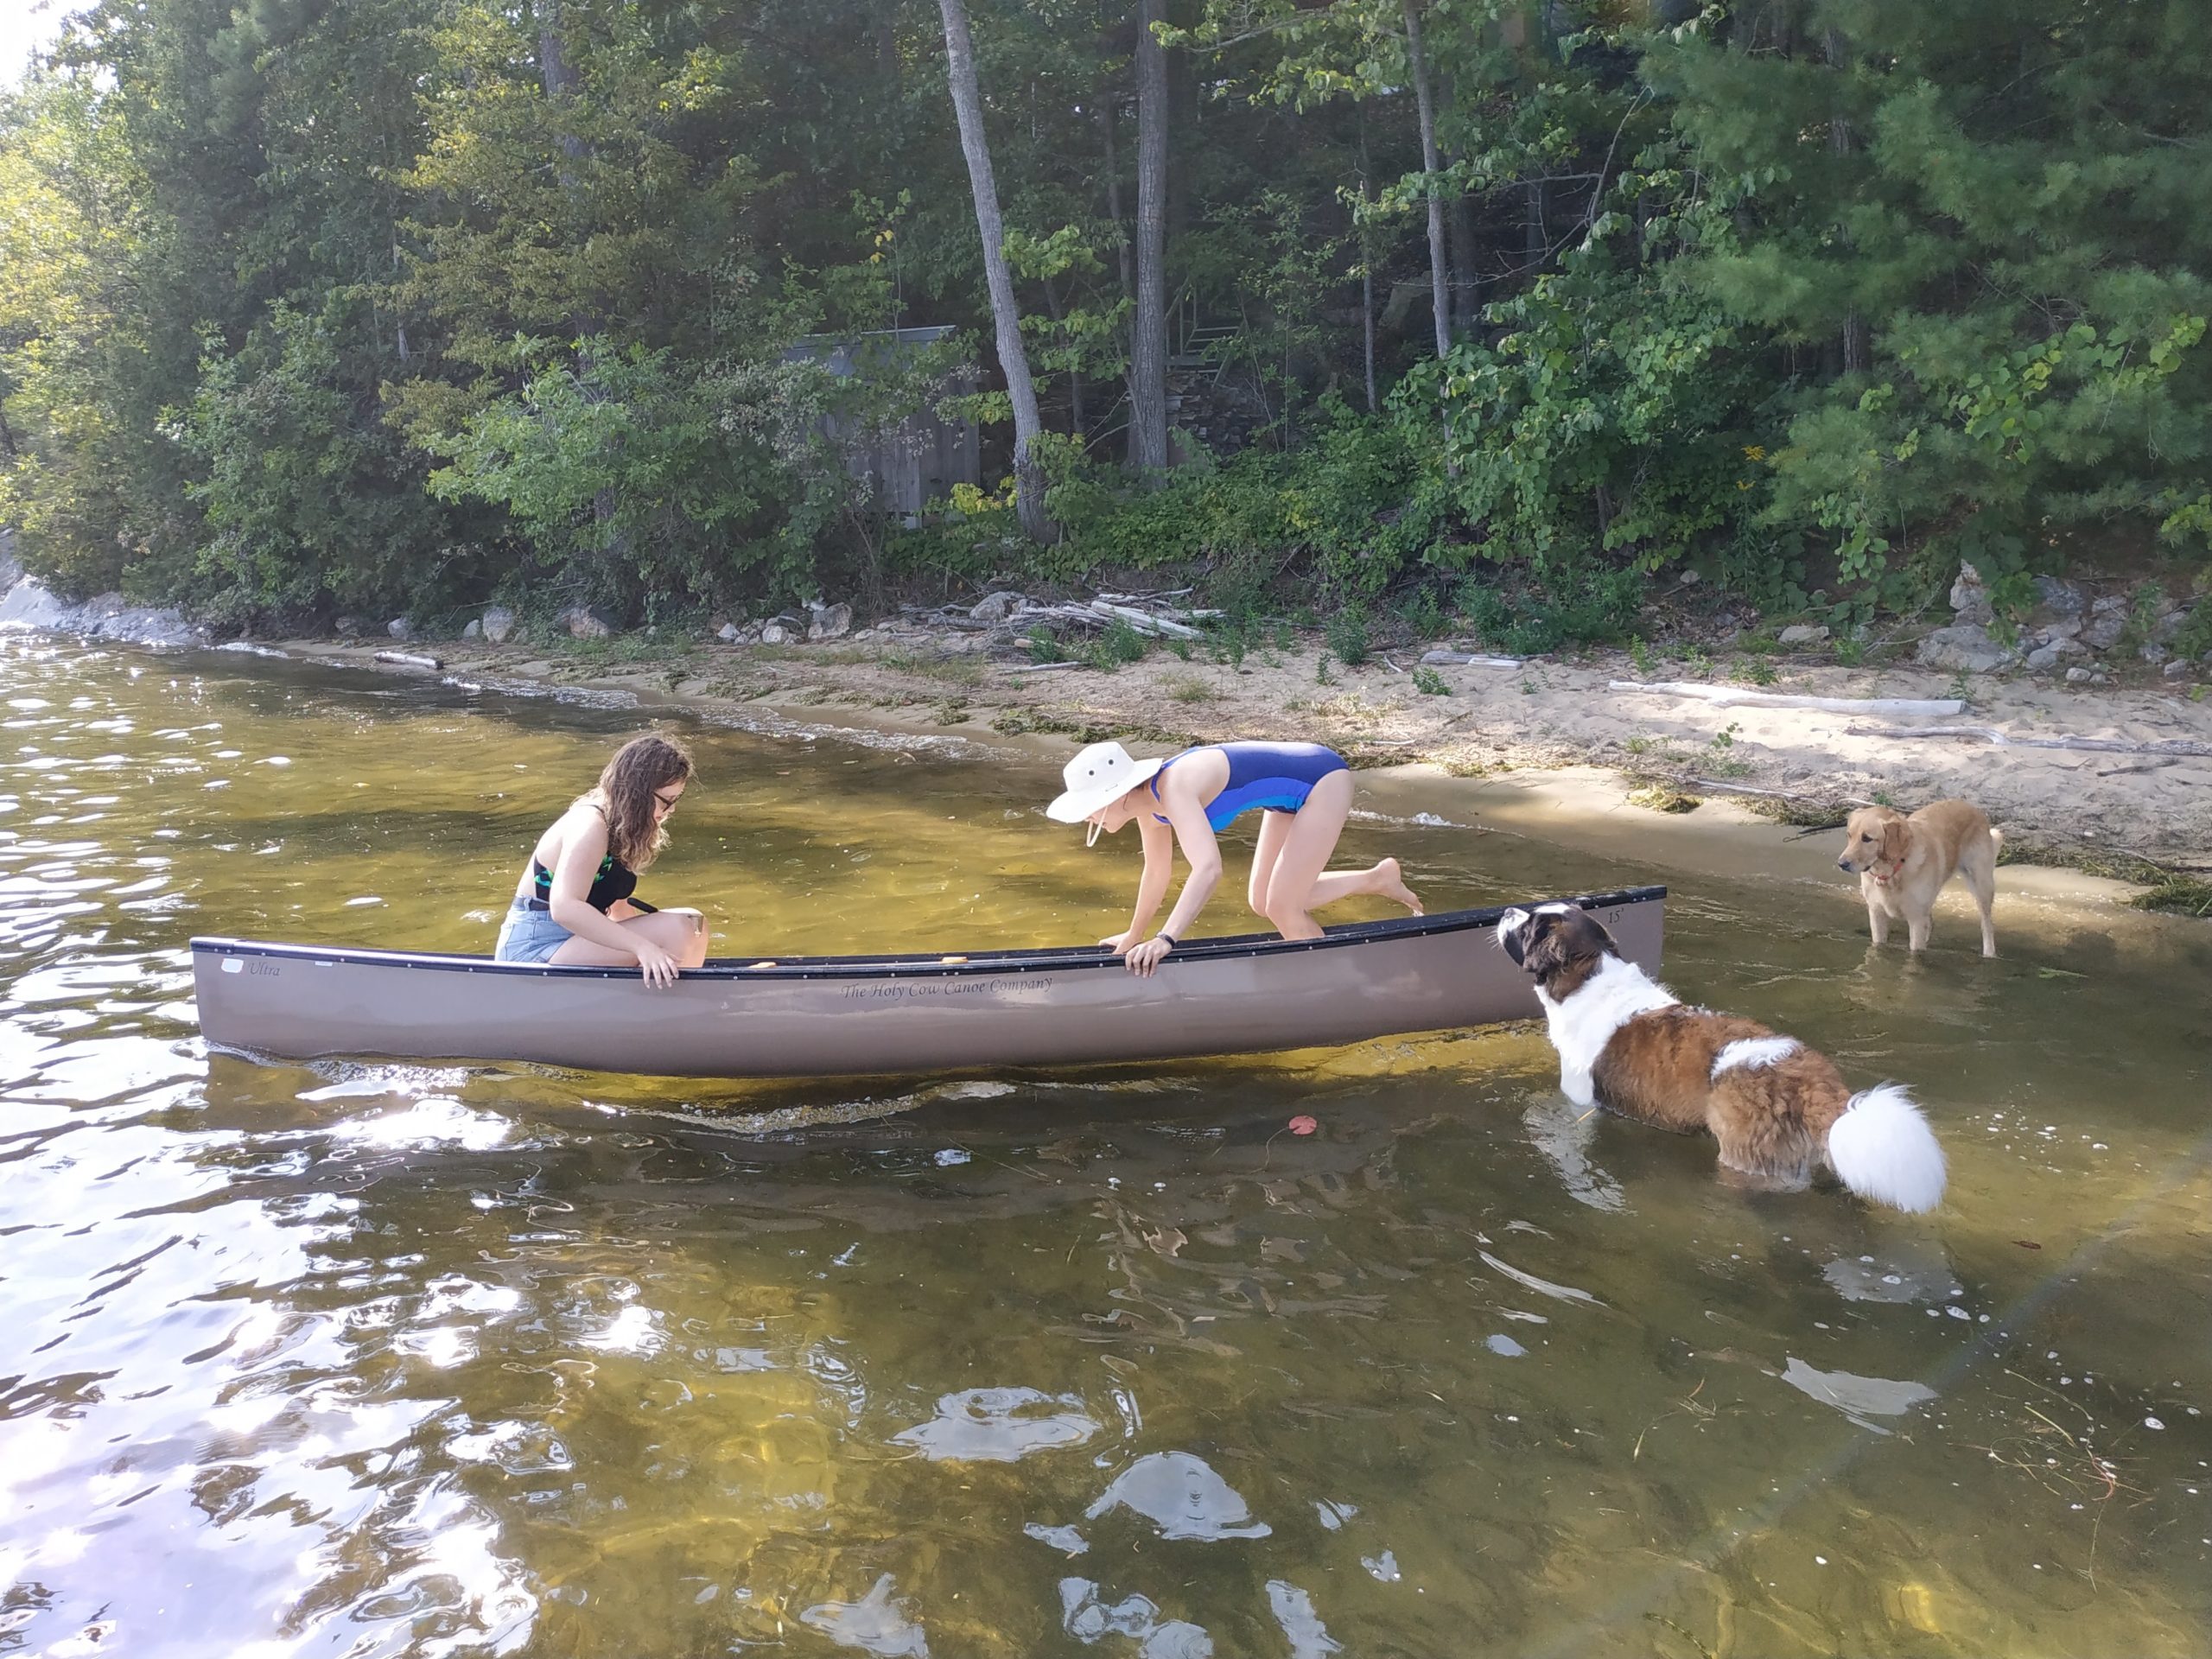 The Holy Cow ultraglass canoe is light and easy, even for amateurs.